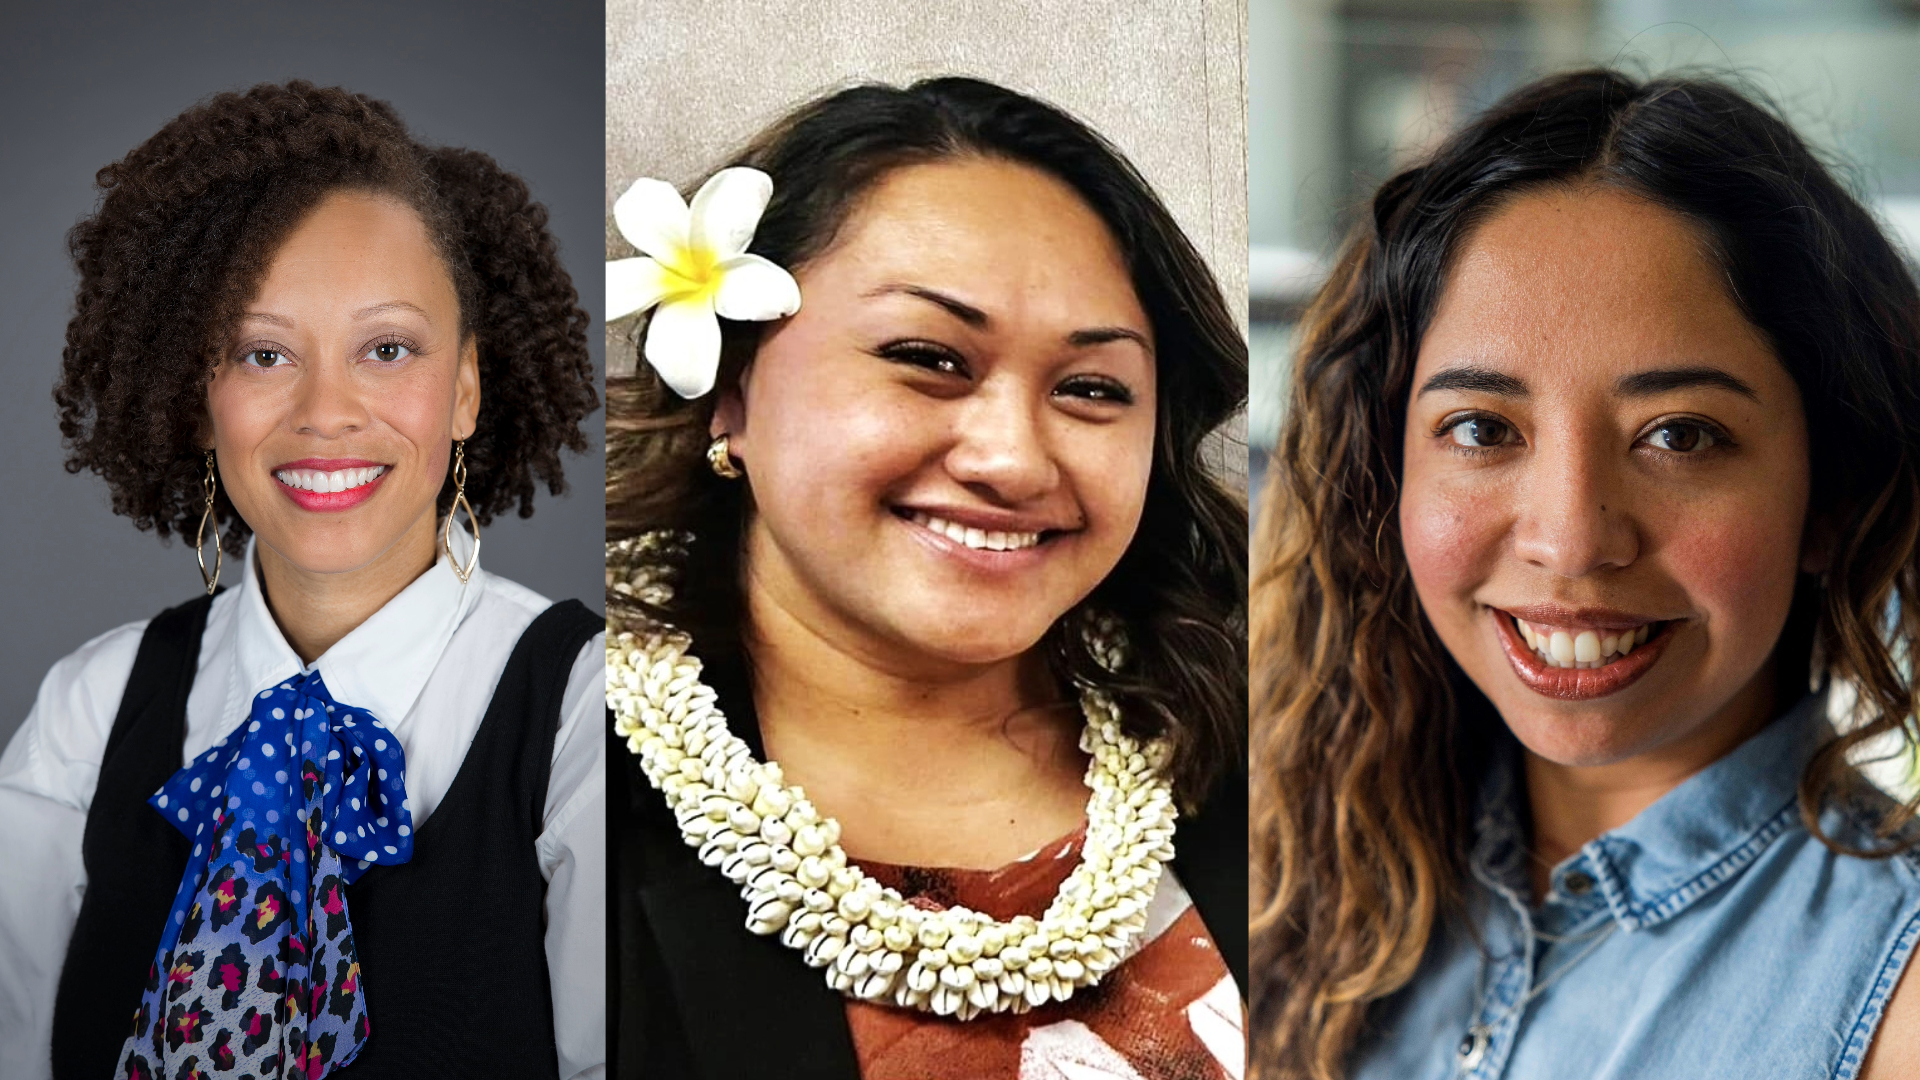 A collage of three panelists for a Mental Health and Cultural Differences webinar; on the left, a woman with black curly hair wearing pink lipstick and a blue tie; in the middle, a woman with dark hair wearing a lei and a flower in her hair; on the right, a woman with long brown hair wearing a denim shirt. 